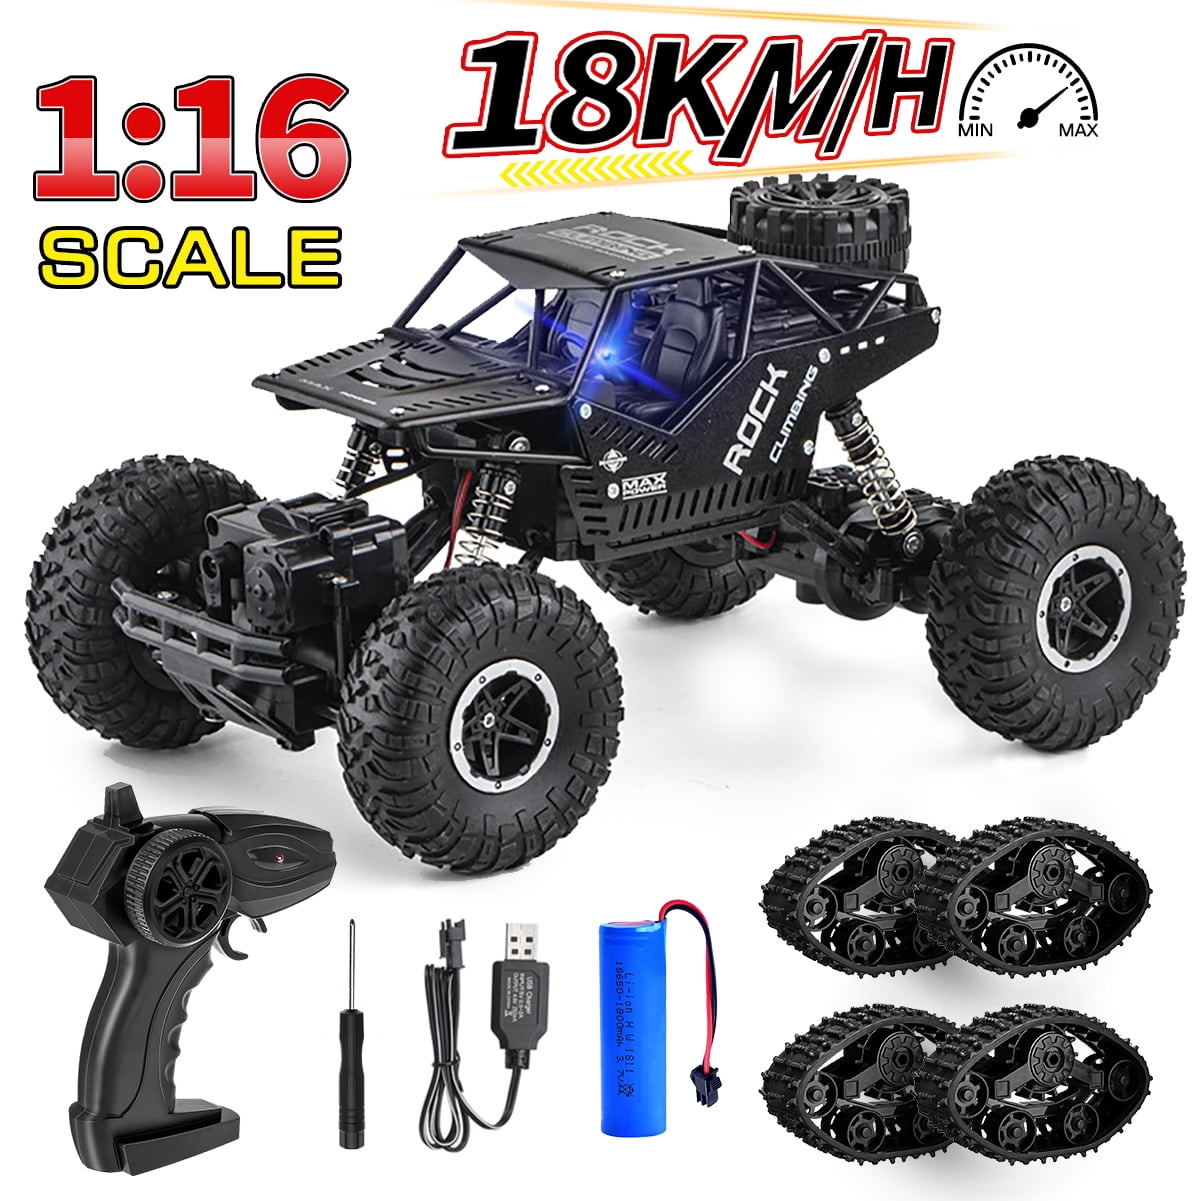 Professional 4WD Remote Control Cart 38KM/H High Speed Off-Road